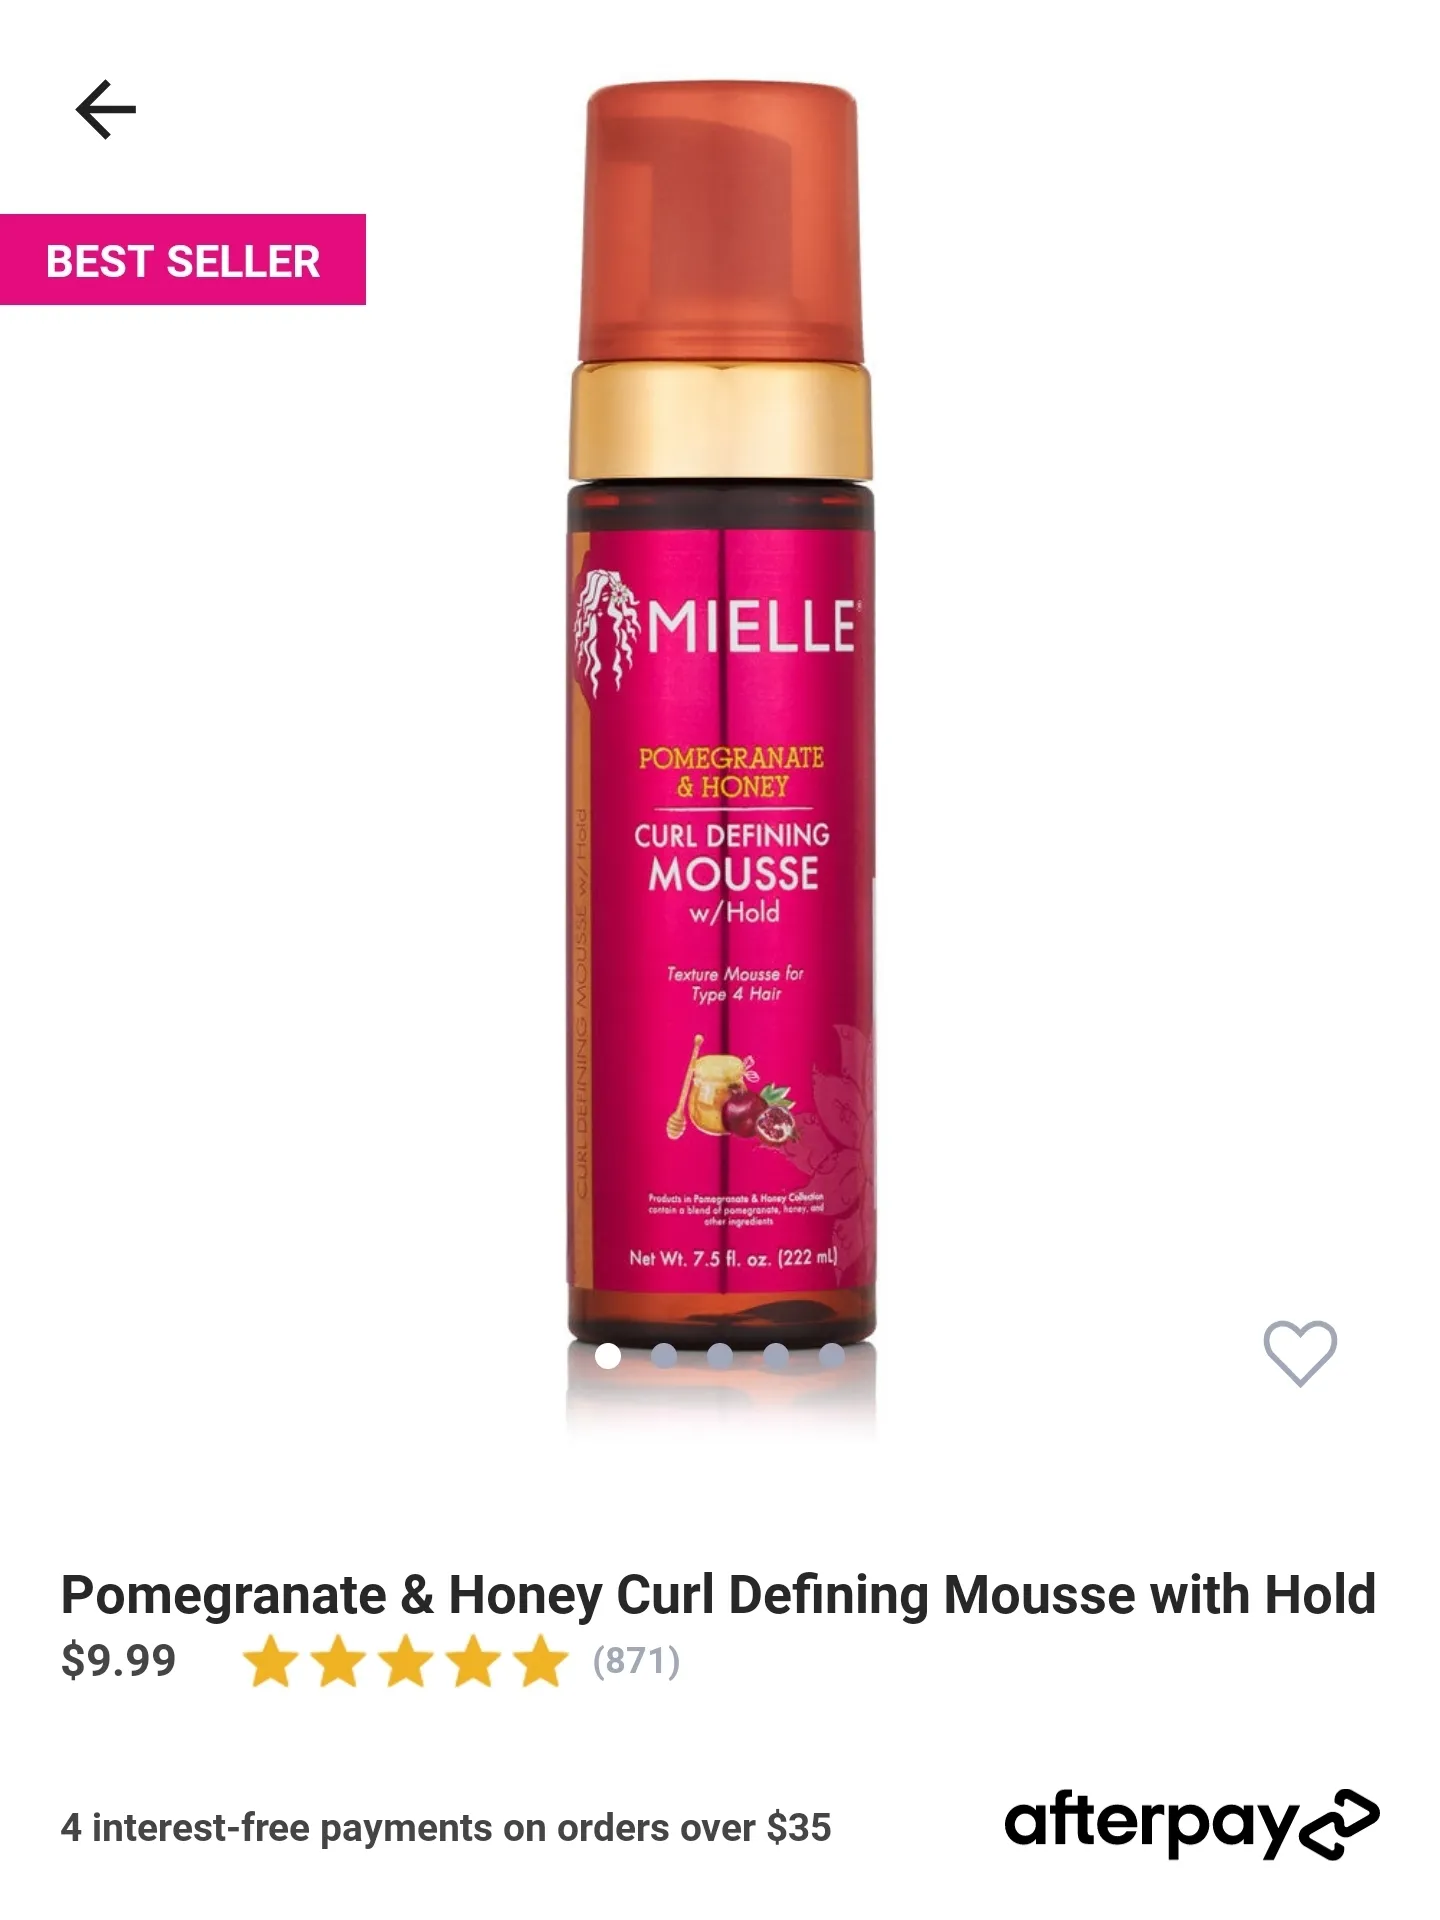 So I Tried The Mielle Mousse.  Mielle Pomegranate & Honey MAX HOLD  Mousse 